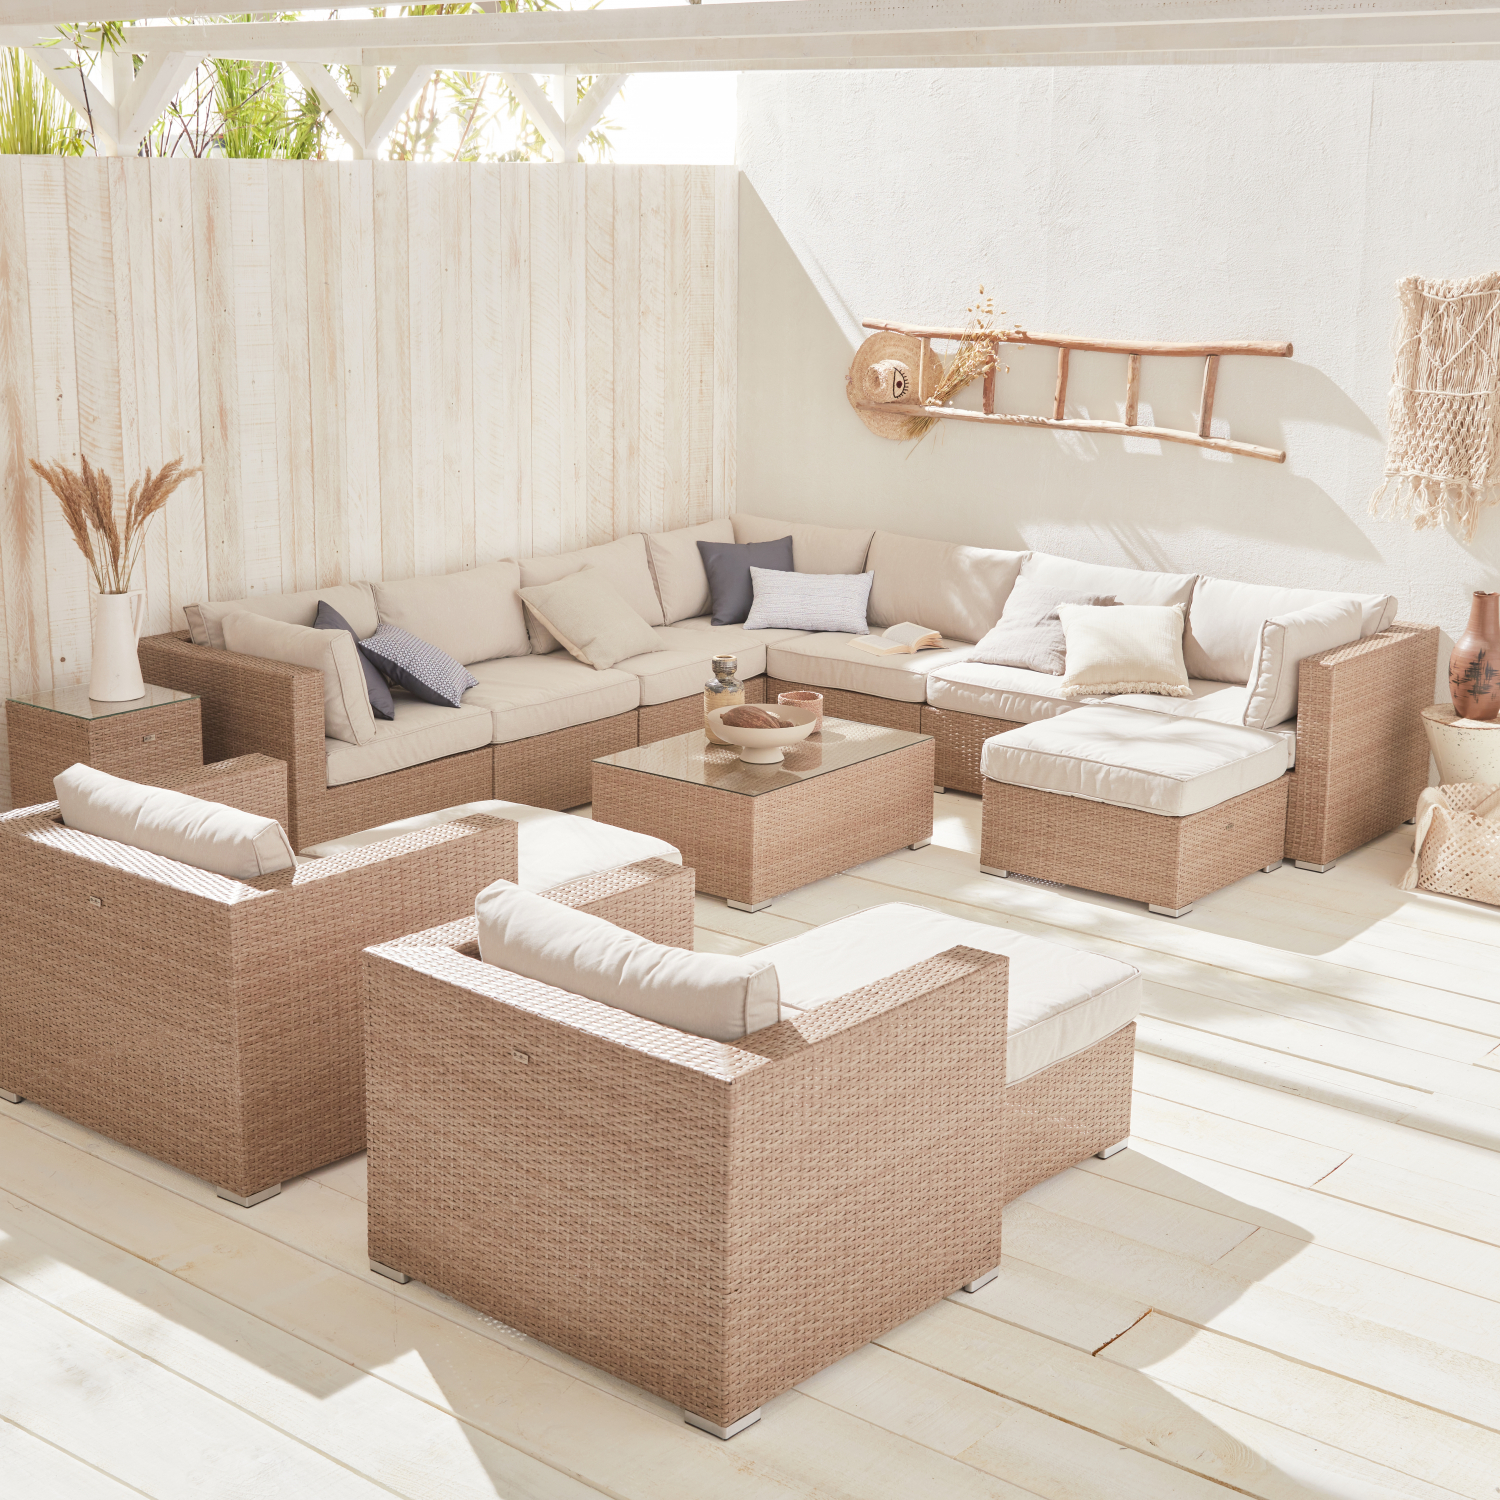 Tripoli 13 seater outdoor lounge beige and natural